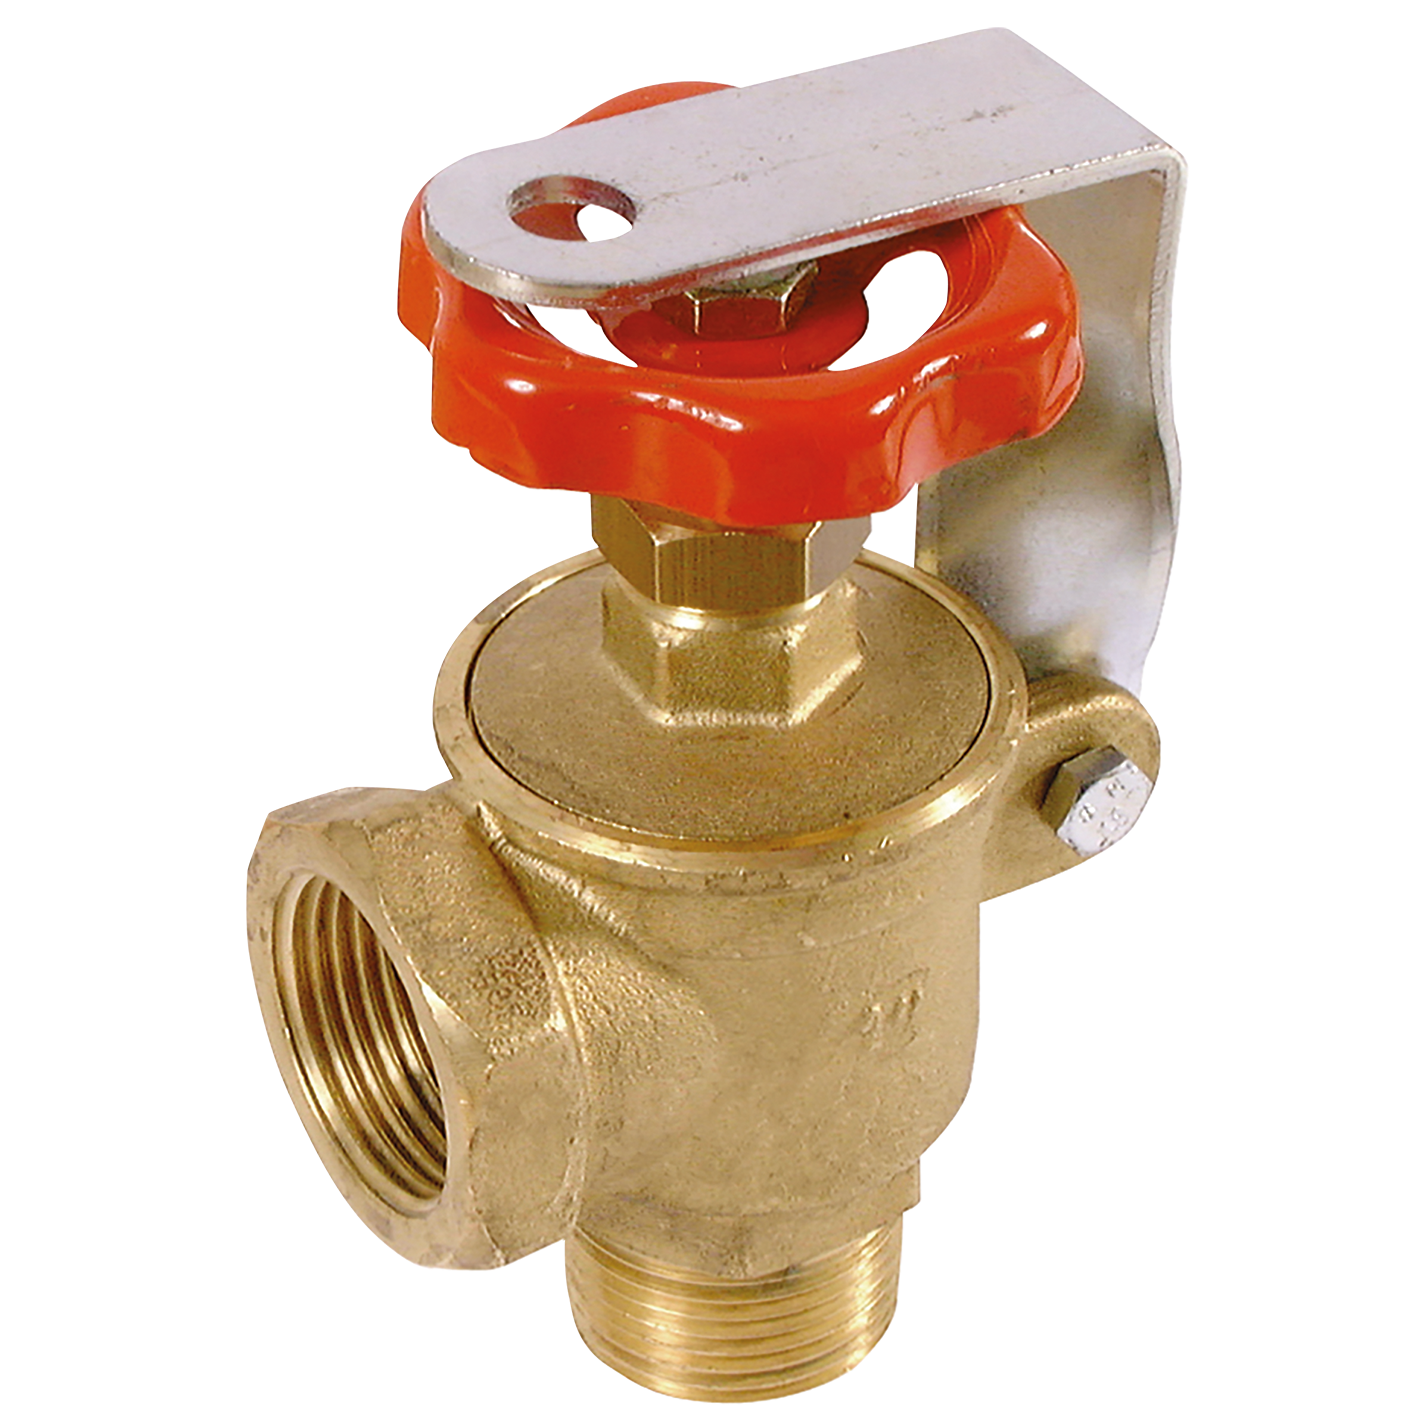 1" FUEL LOCK-OUT VALVE